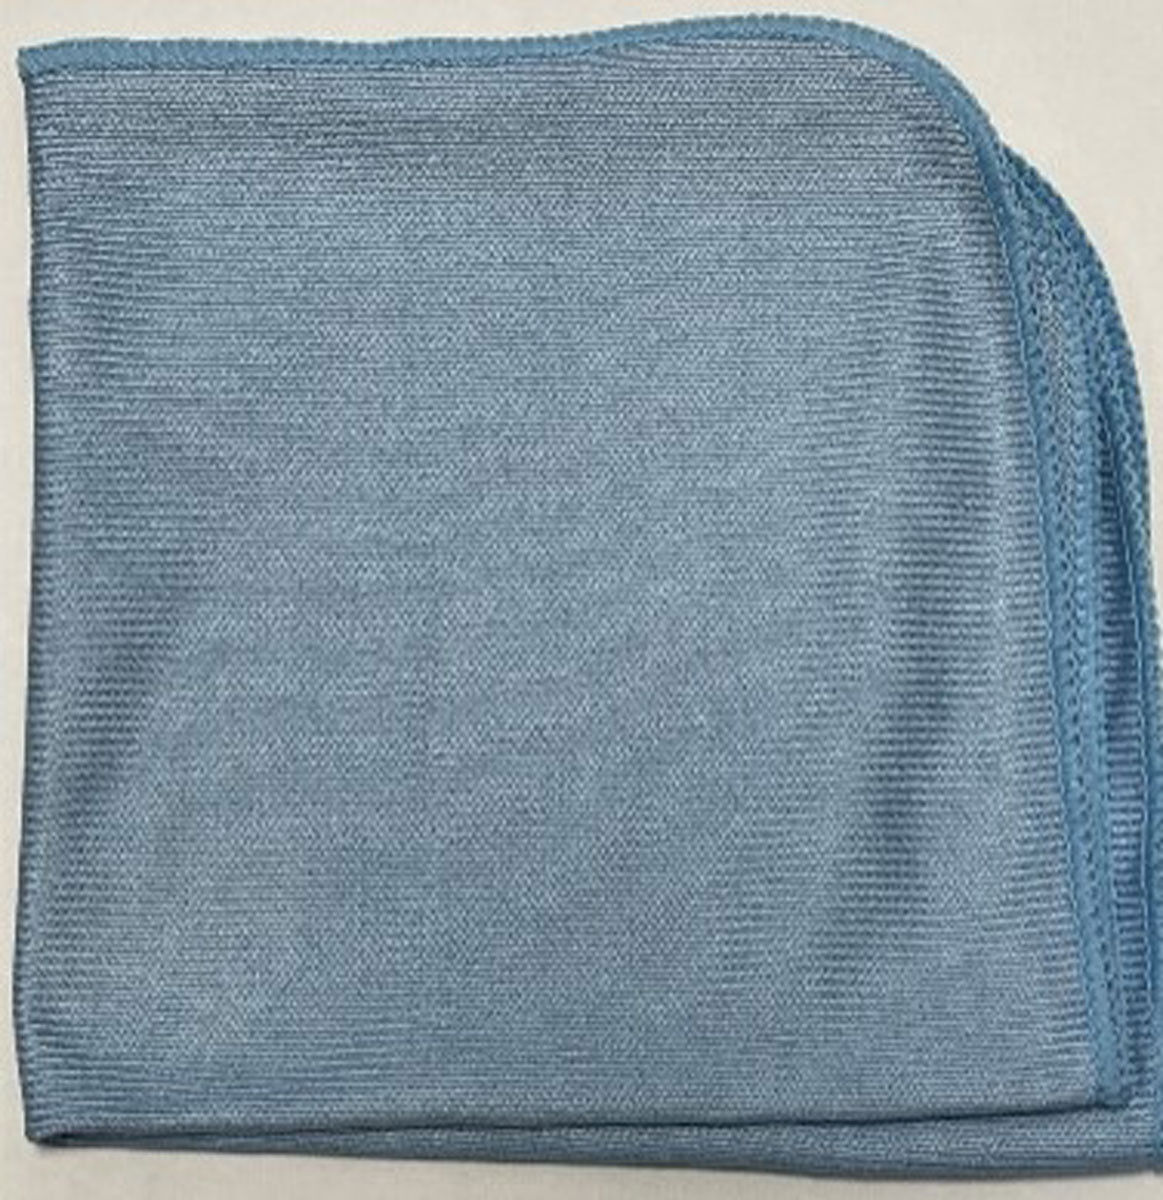 How durable are these microfiber cloths?